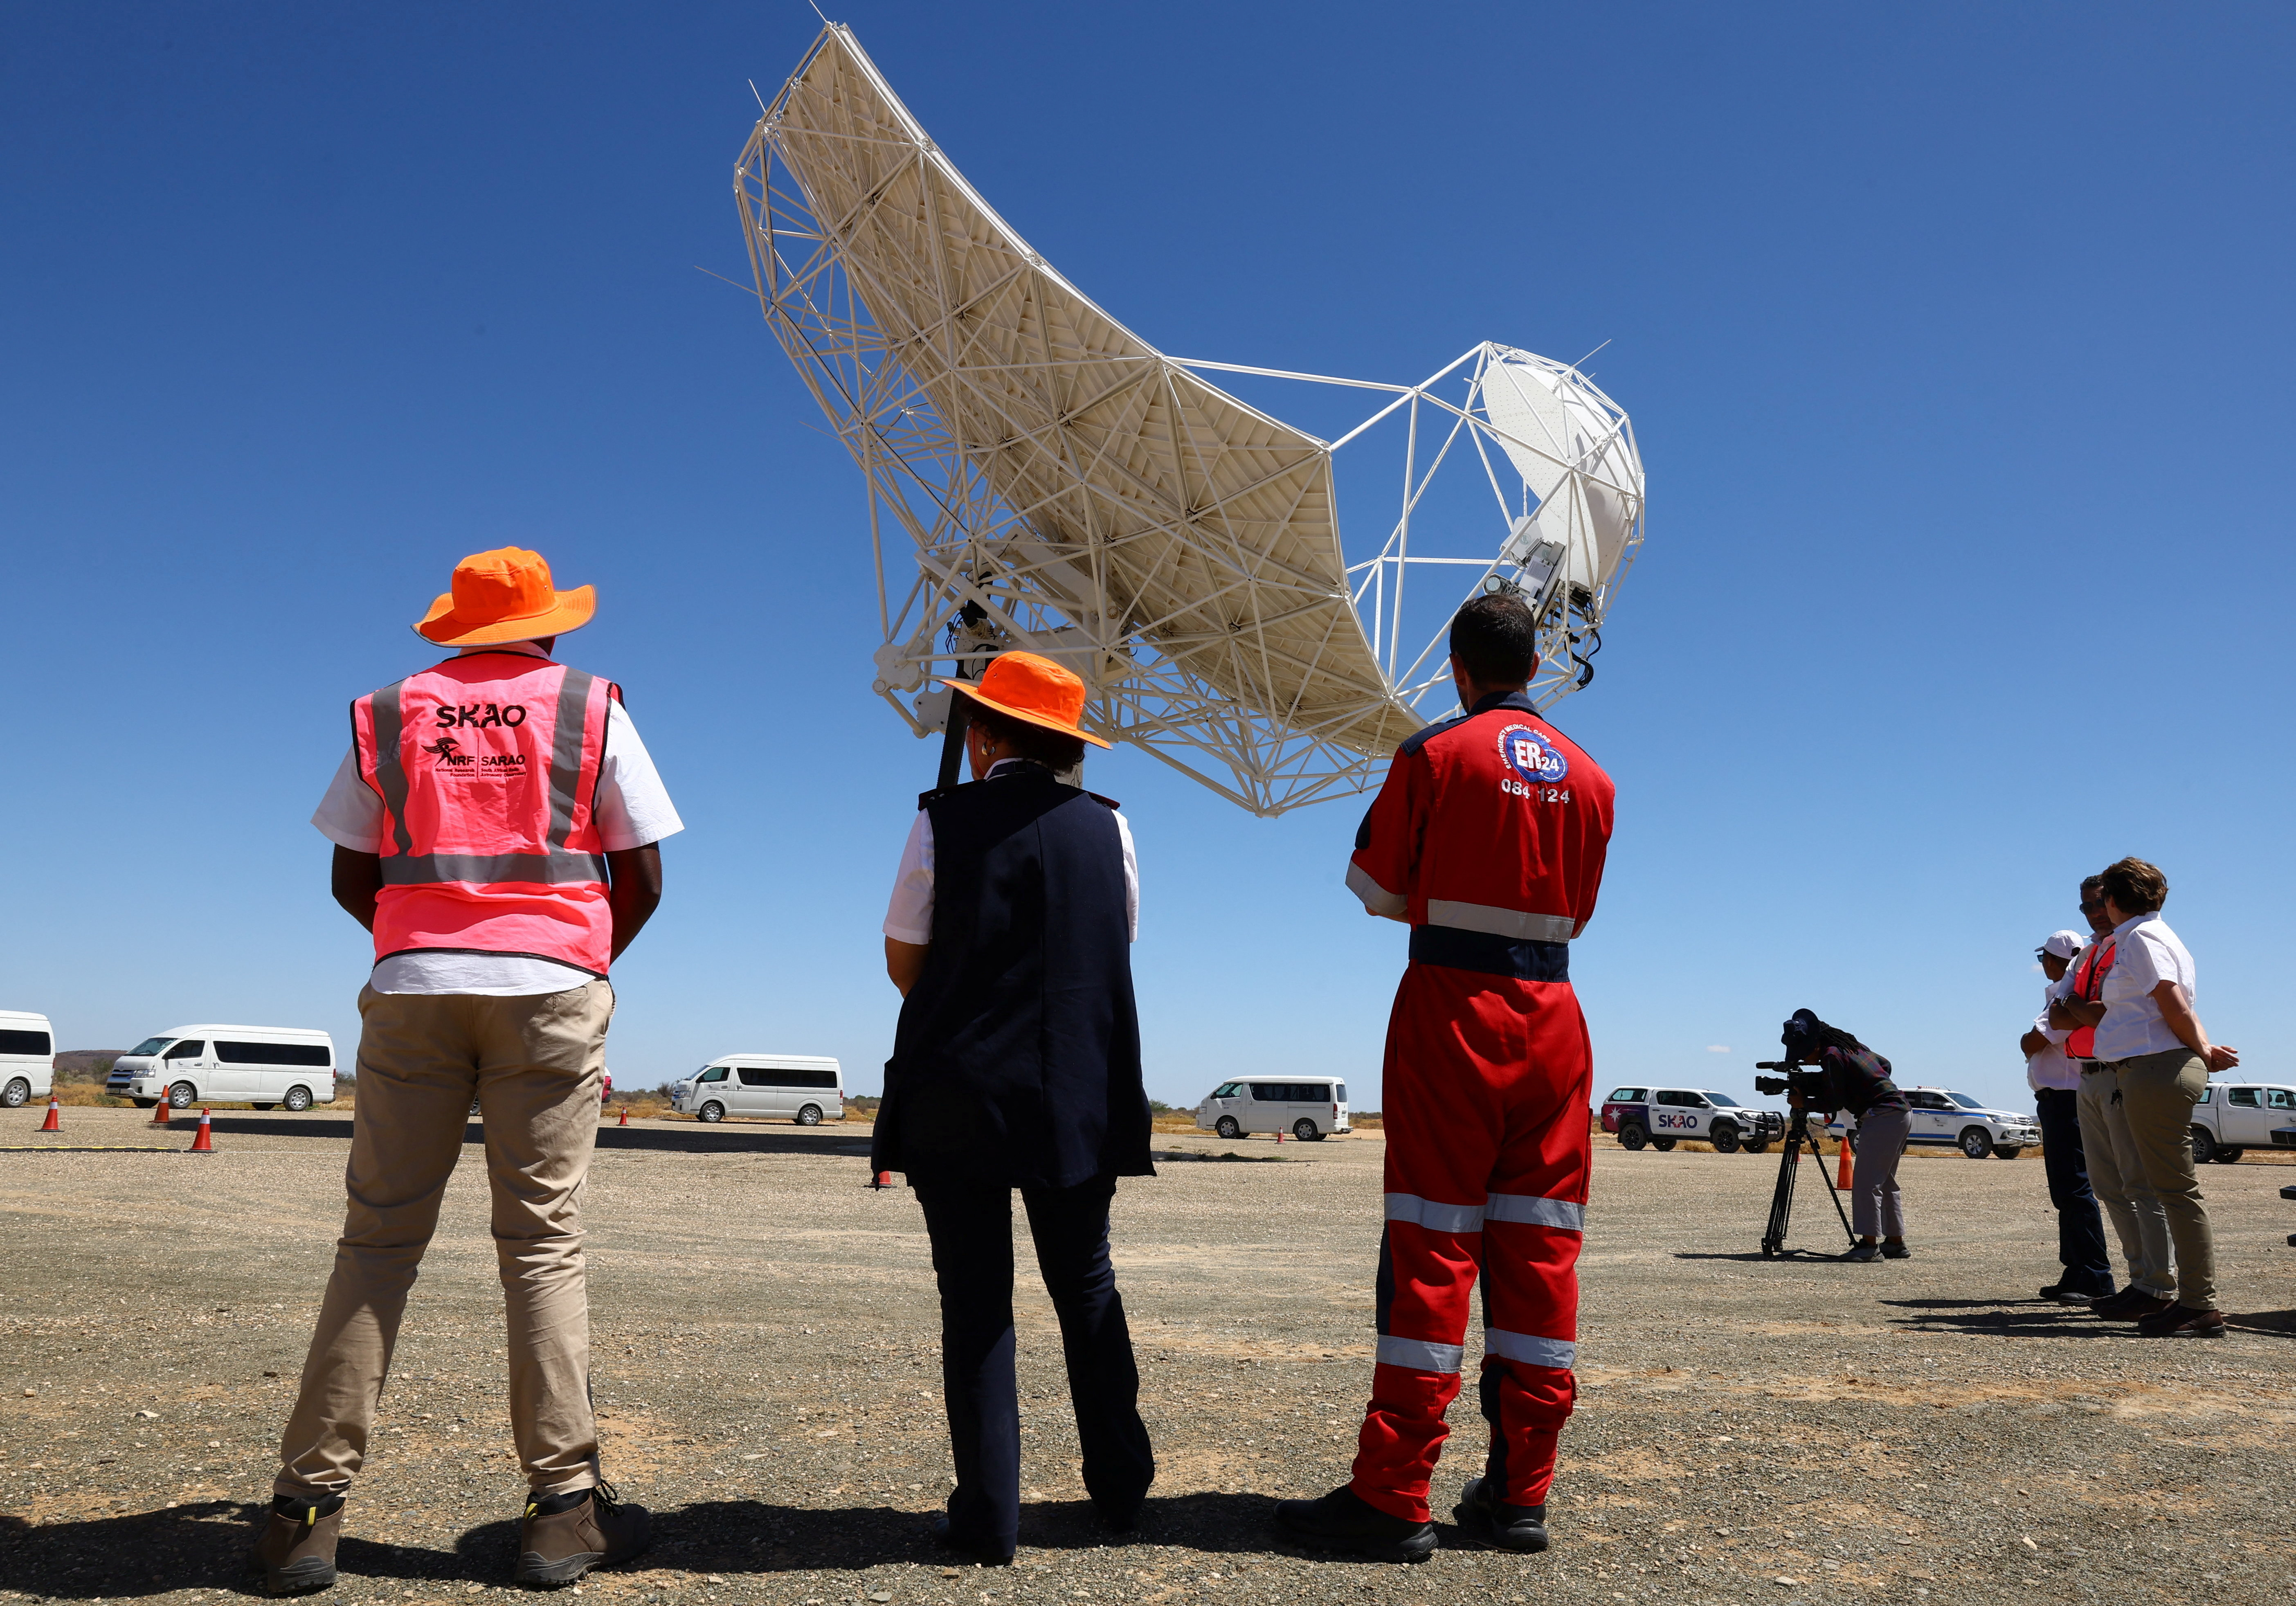 Official launch of construction of the SKA-Mid telescope in Carnarvon